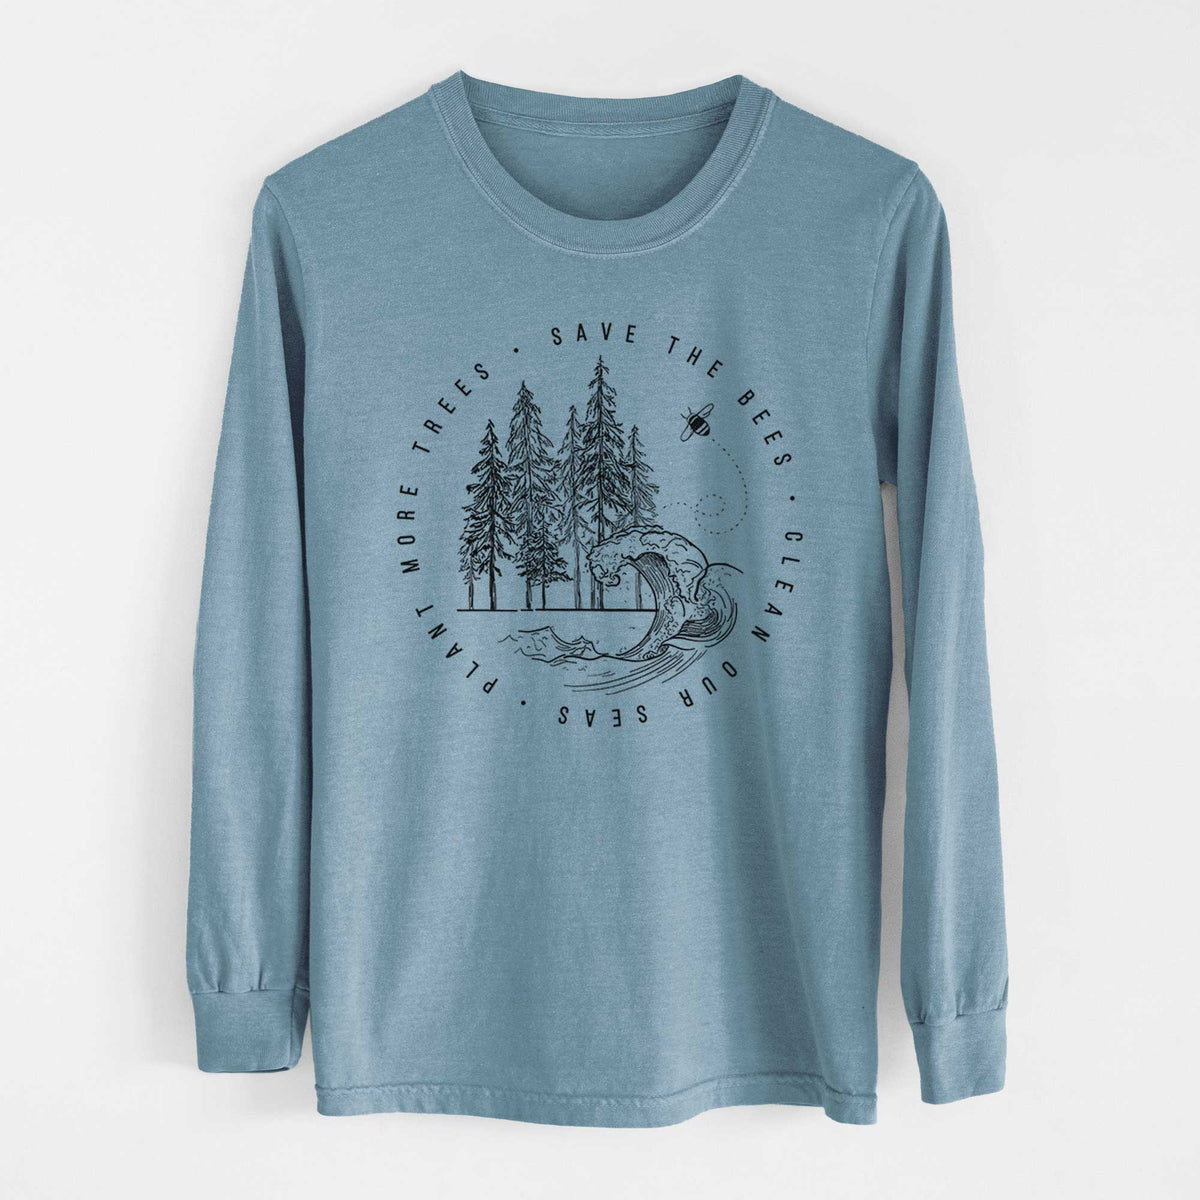 Save the Bees, Clean our Seas, Plant more Trees - Heavyweight 100% Cotton Long Sleeve